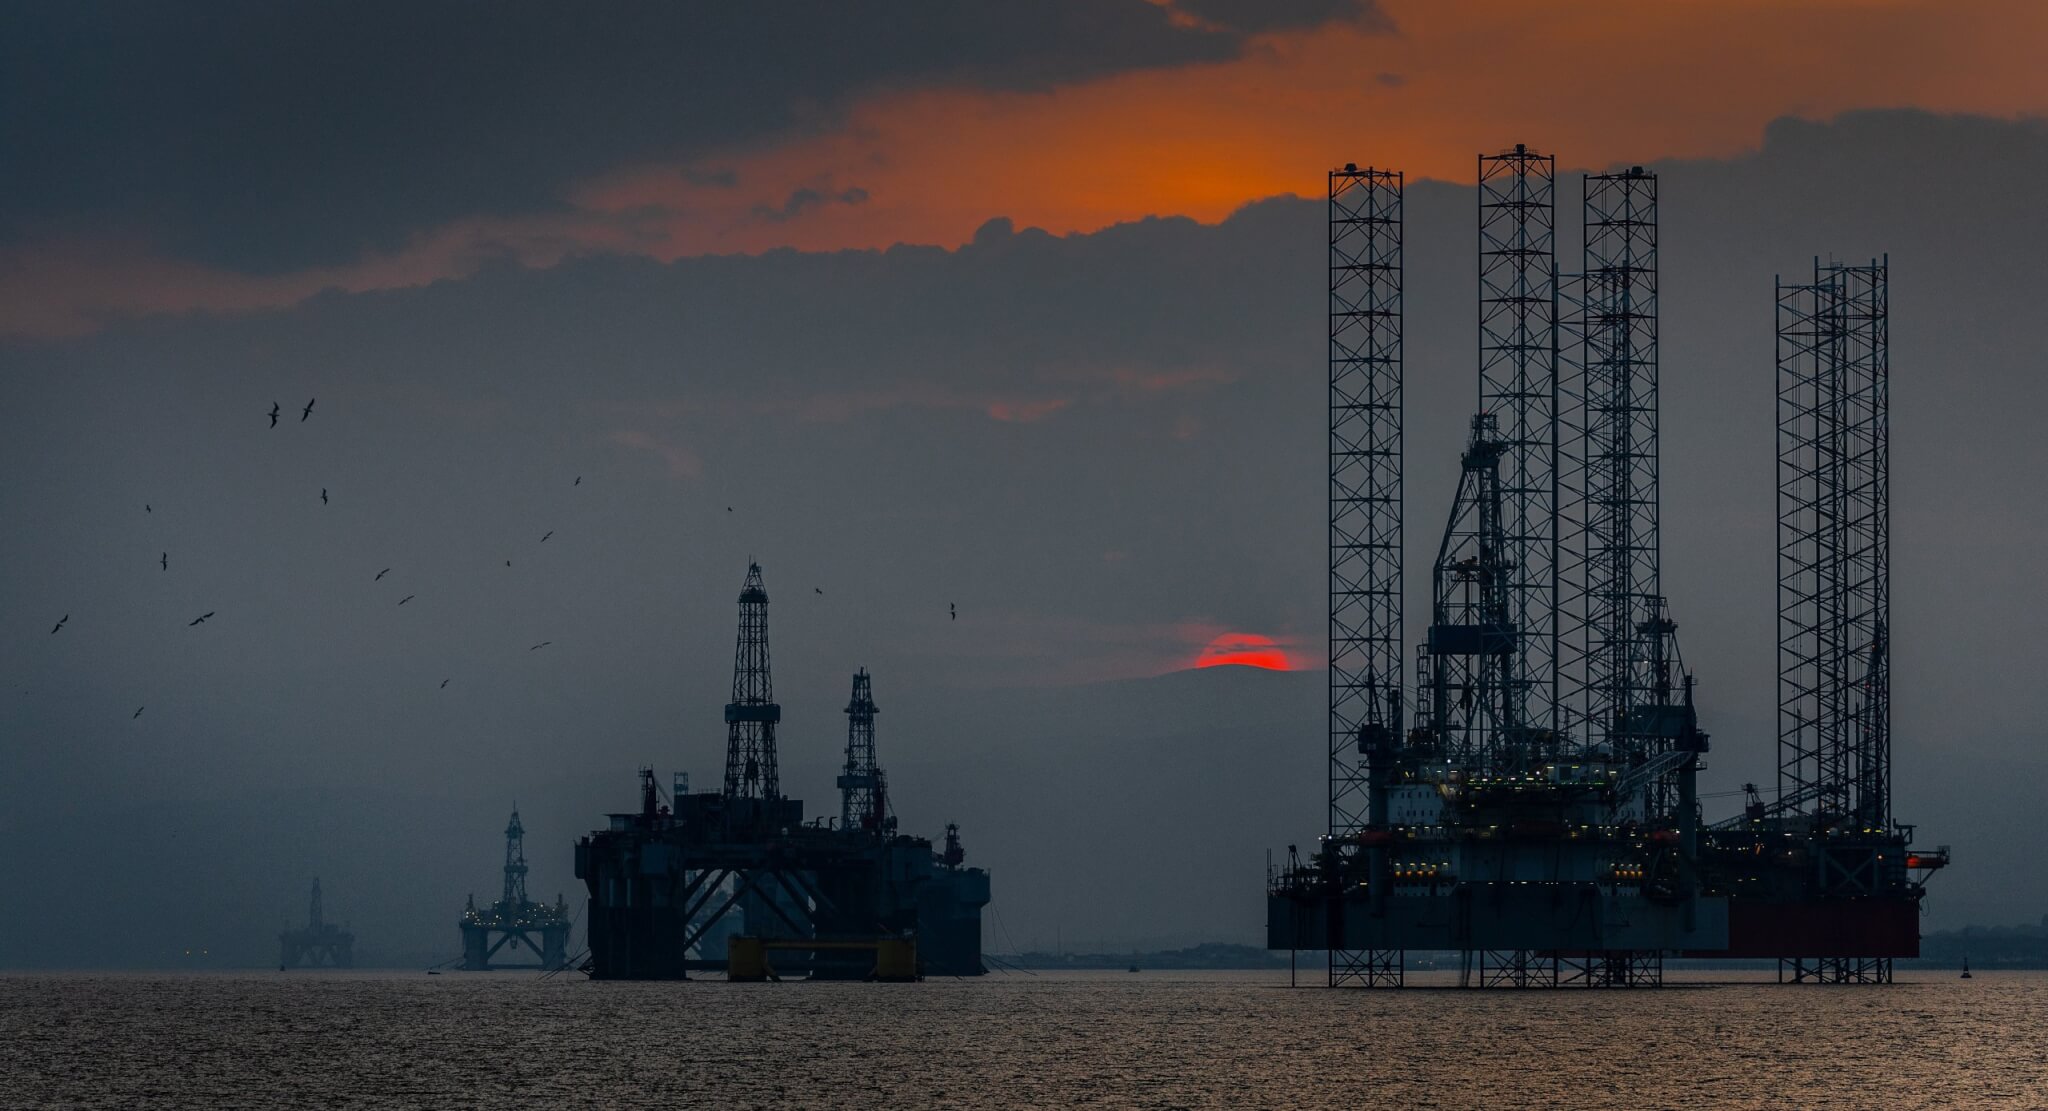 An off-shore oil platform at sunset with flocks of birds circling.